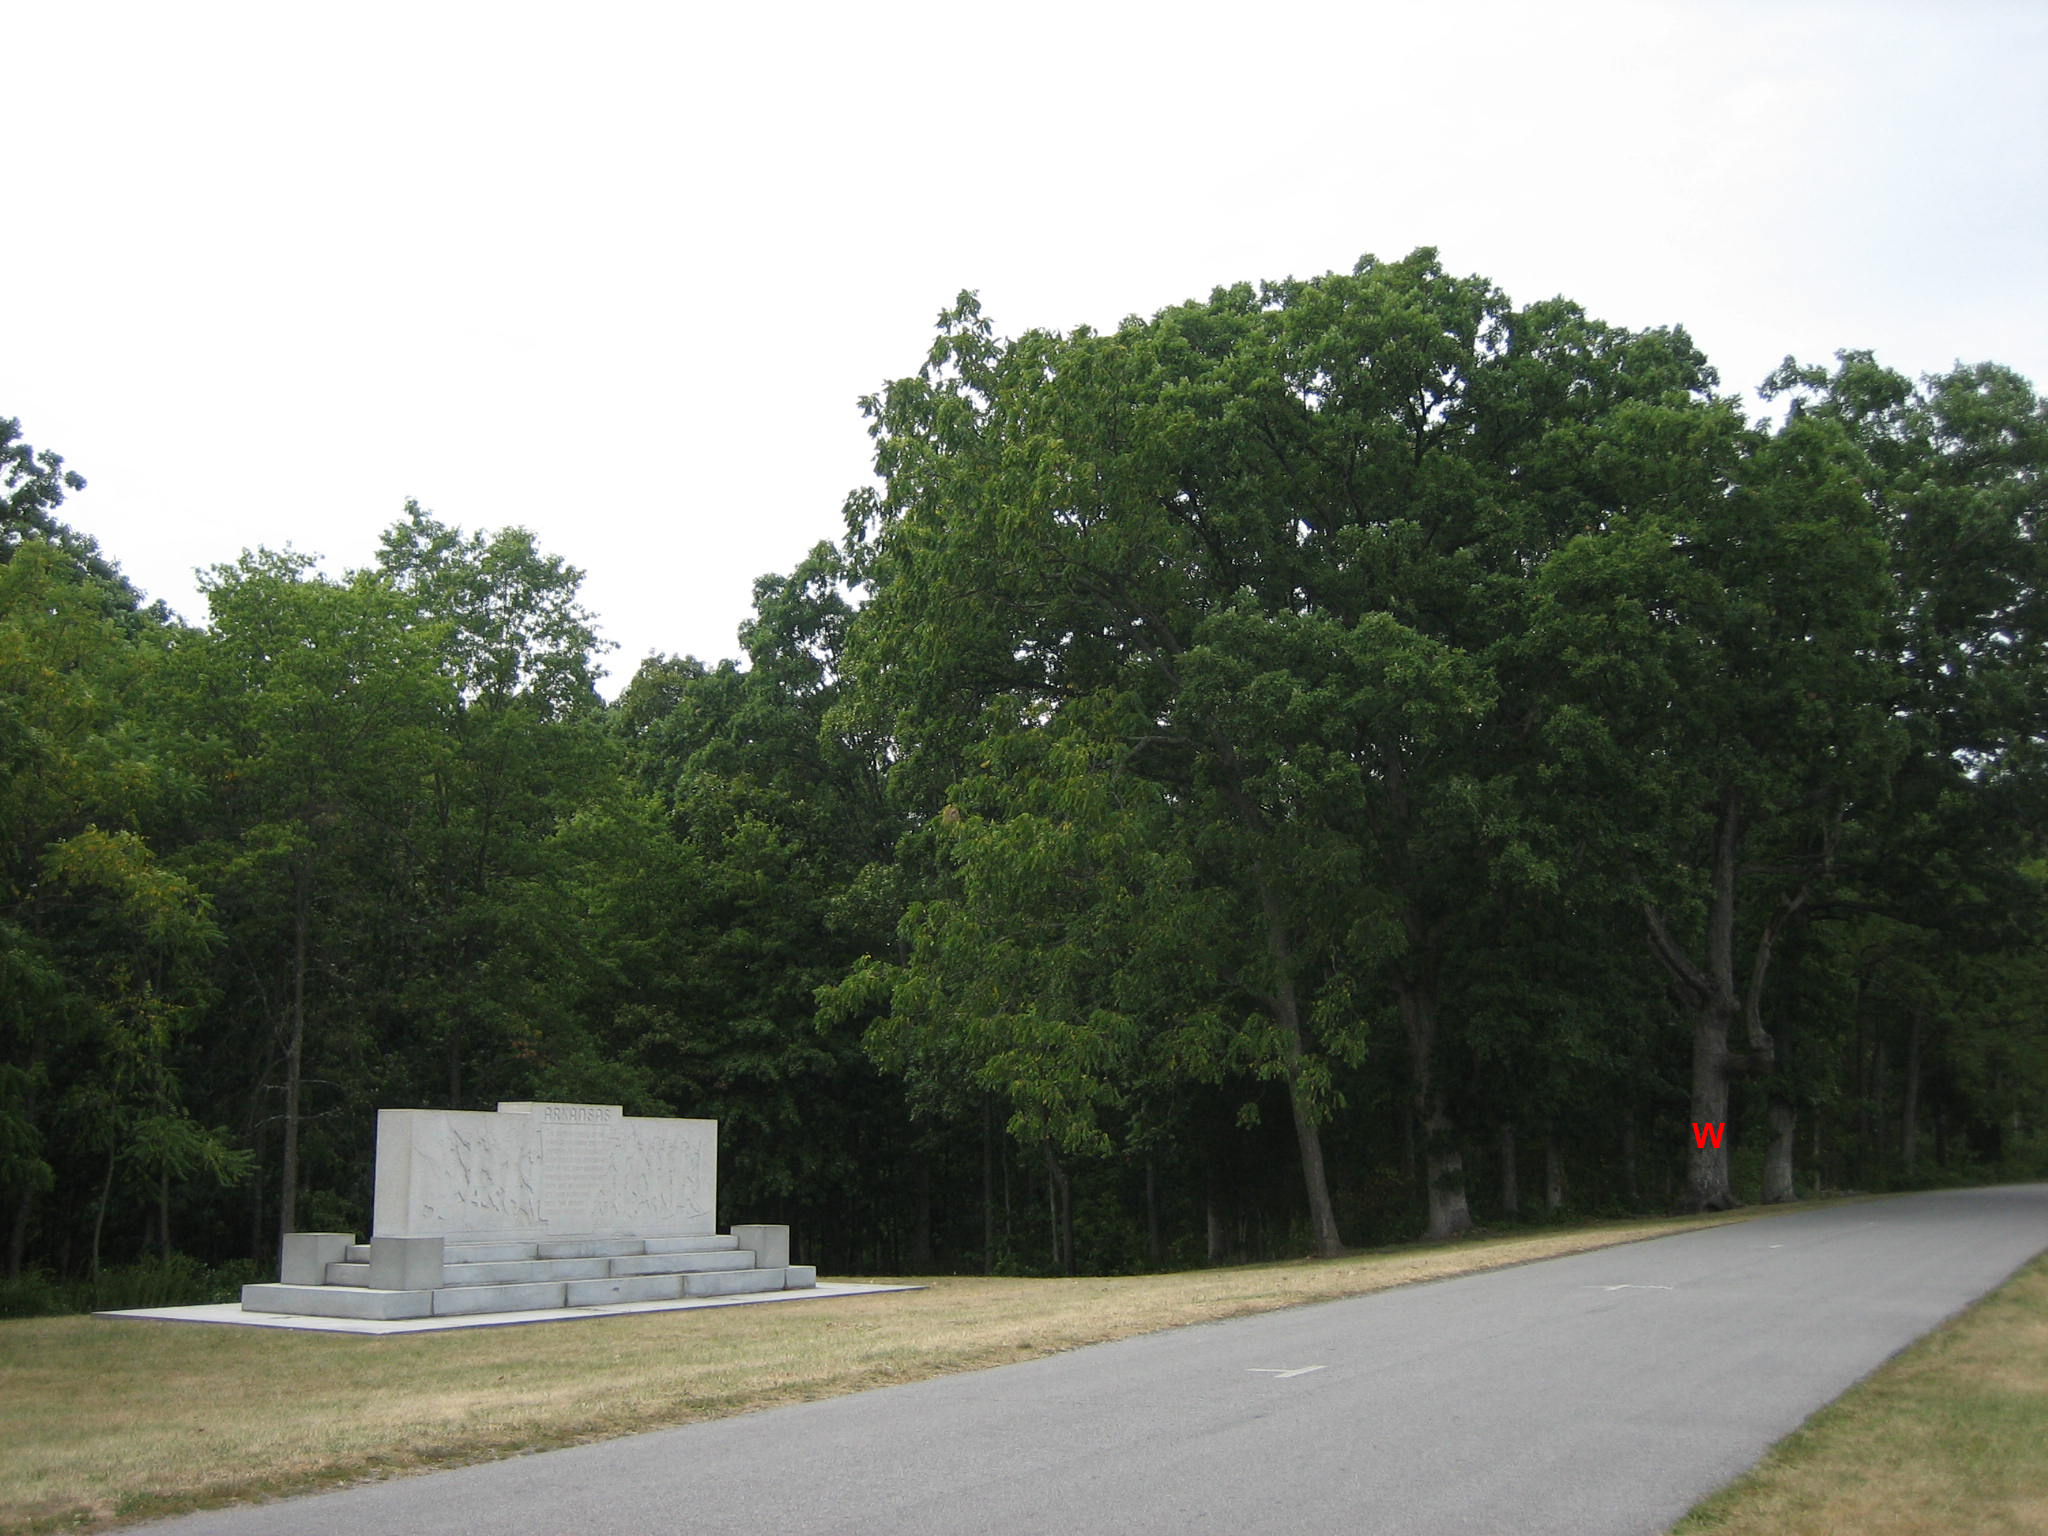 Another Slowly Dying Gettysburg Witness Tree | Gettysburg Daily